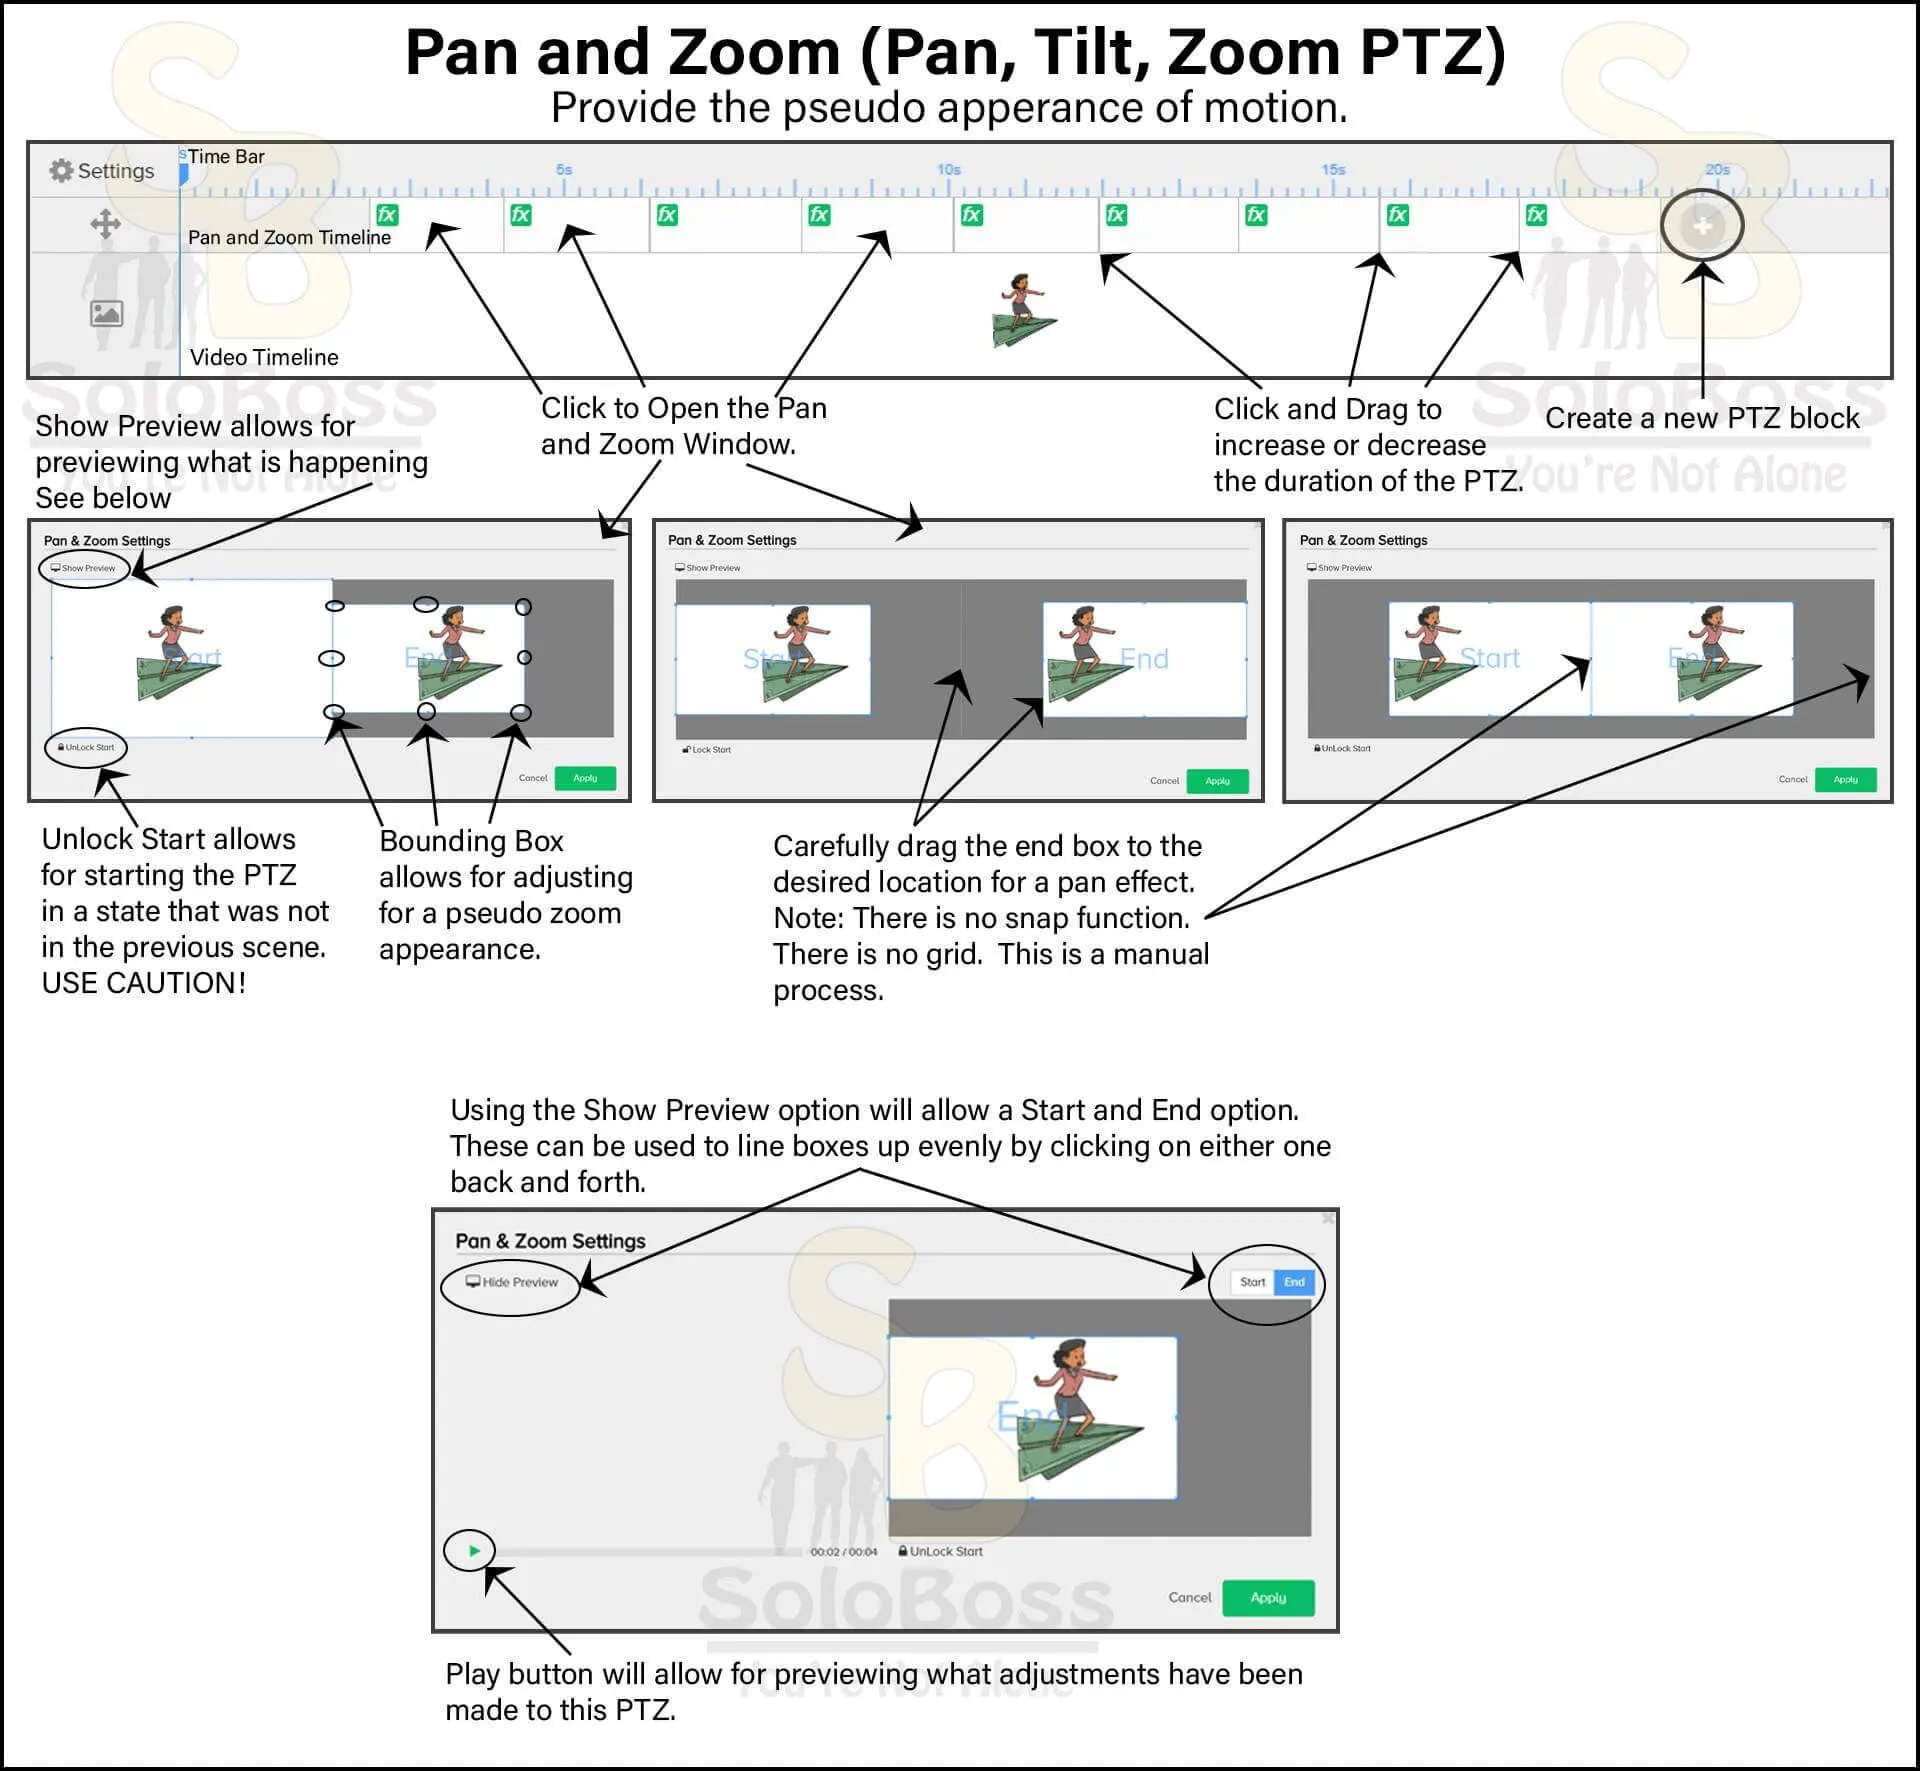 Displays and defines the pan and zoom controls in the Doodly software.